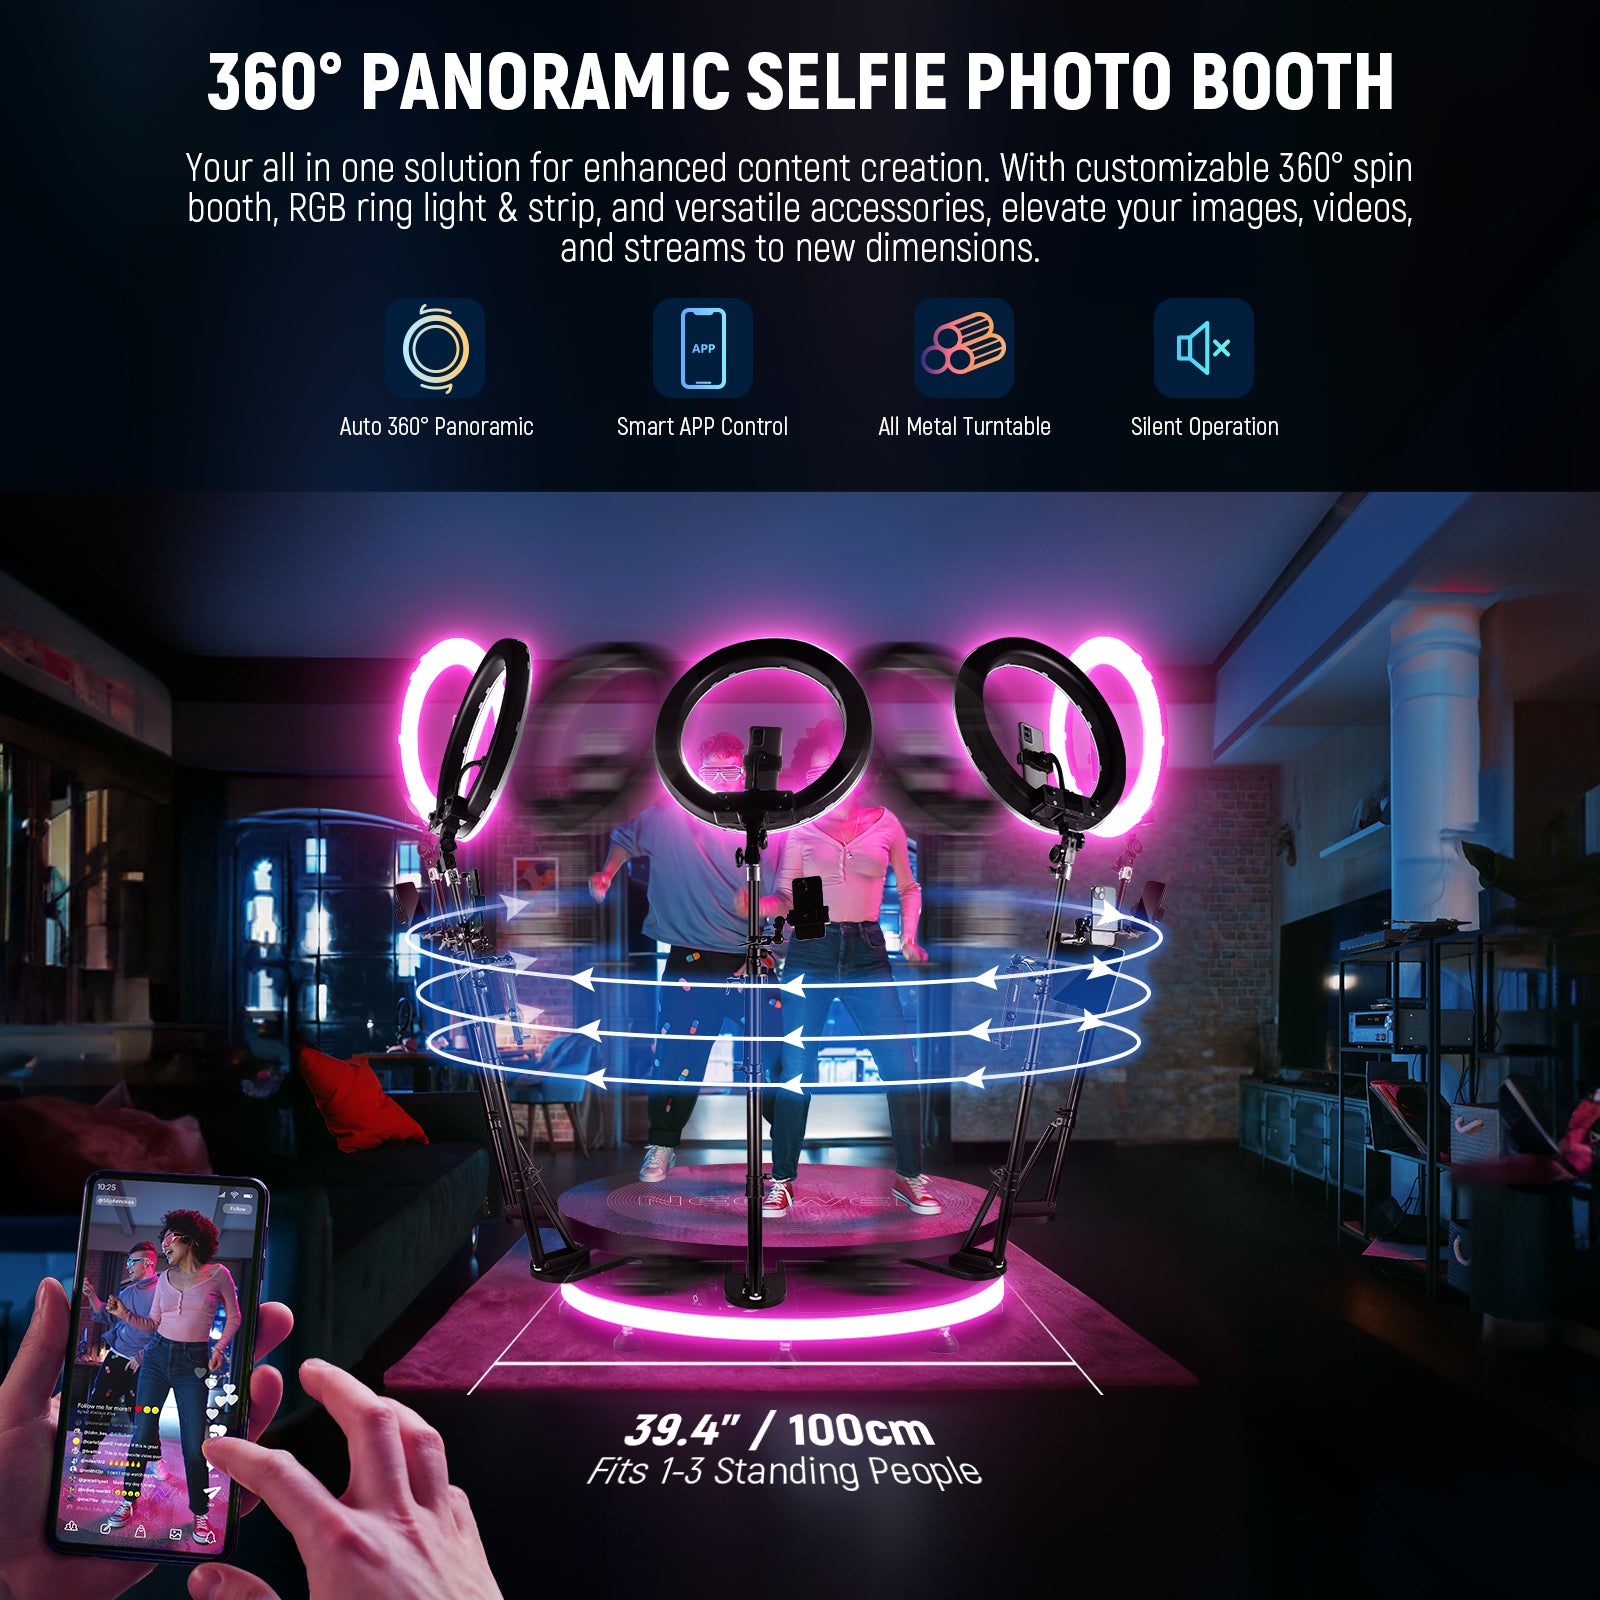 360 Video and Photo Booth Spinning Display Platform - 39 (100cm) Inches